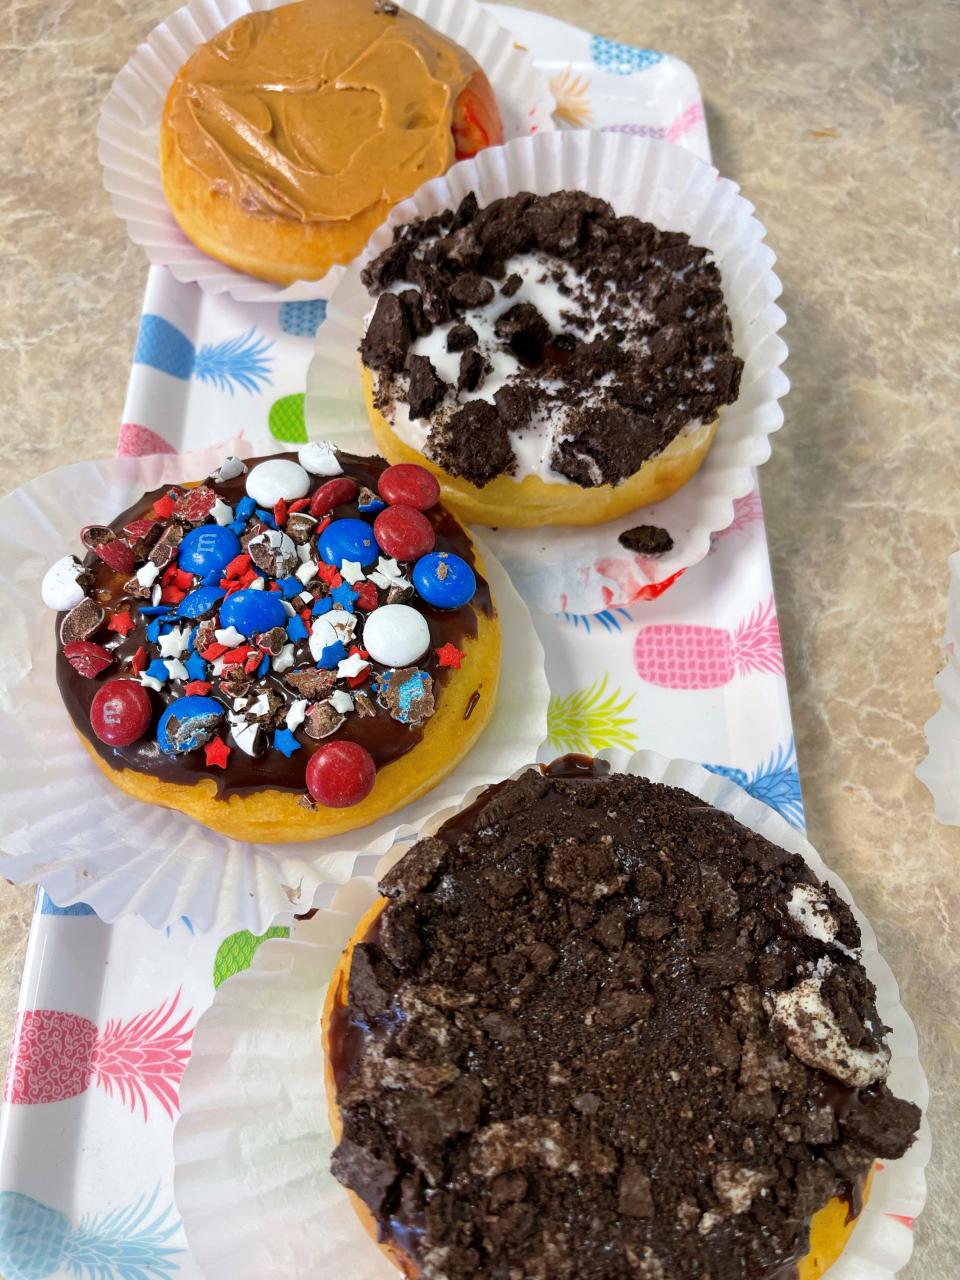 Some of the "different" doughnuts at Crust N Krumbs in Vineland include peanut butter and jelly (top), Oreo topped with white icing, white cream-filled with M&Ms and white cream-filled with crushed Oreos on top.